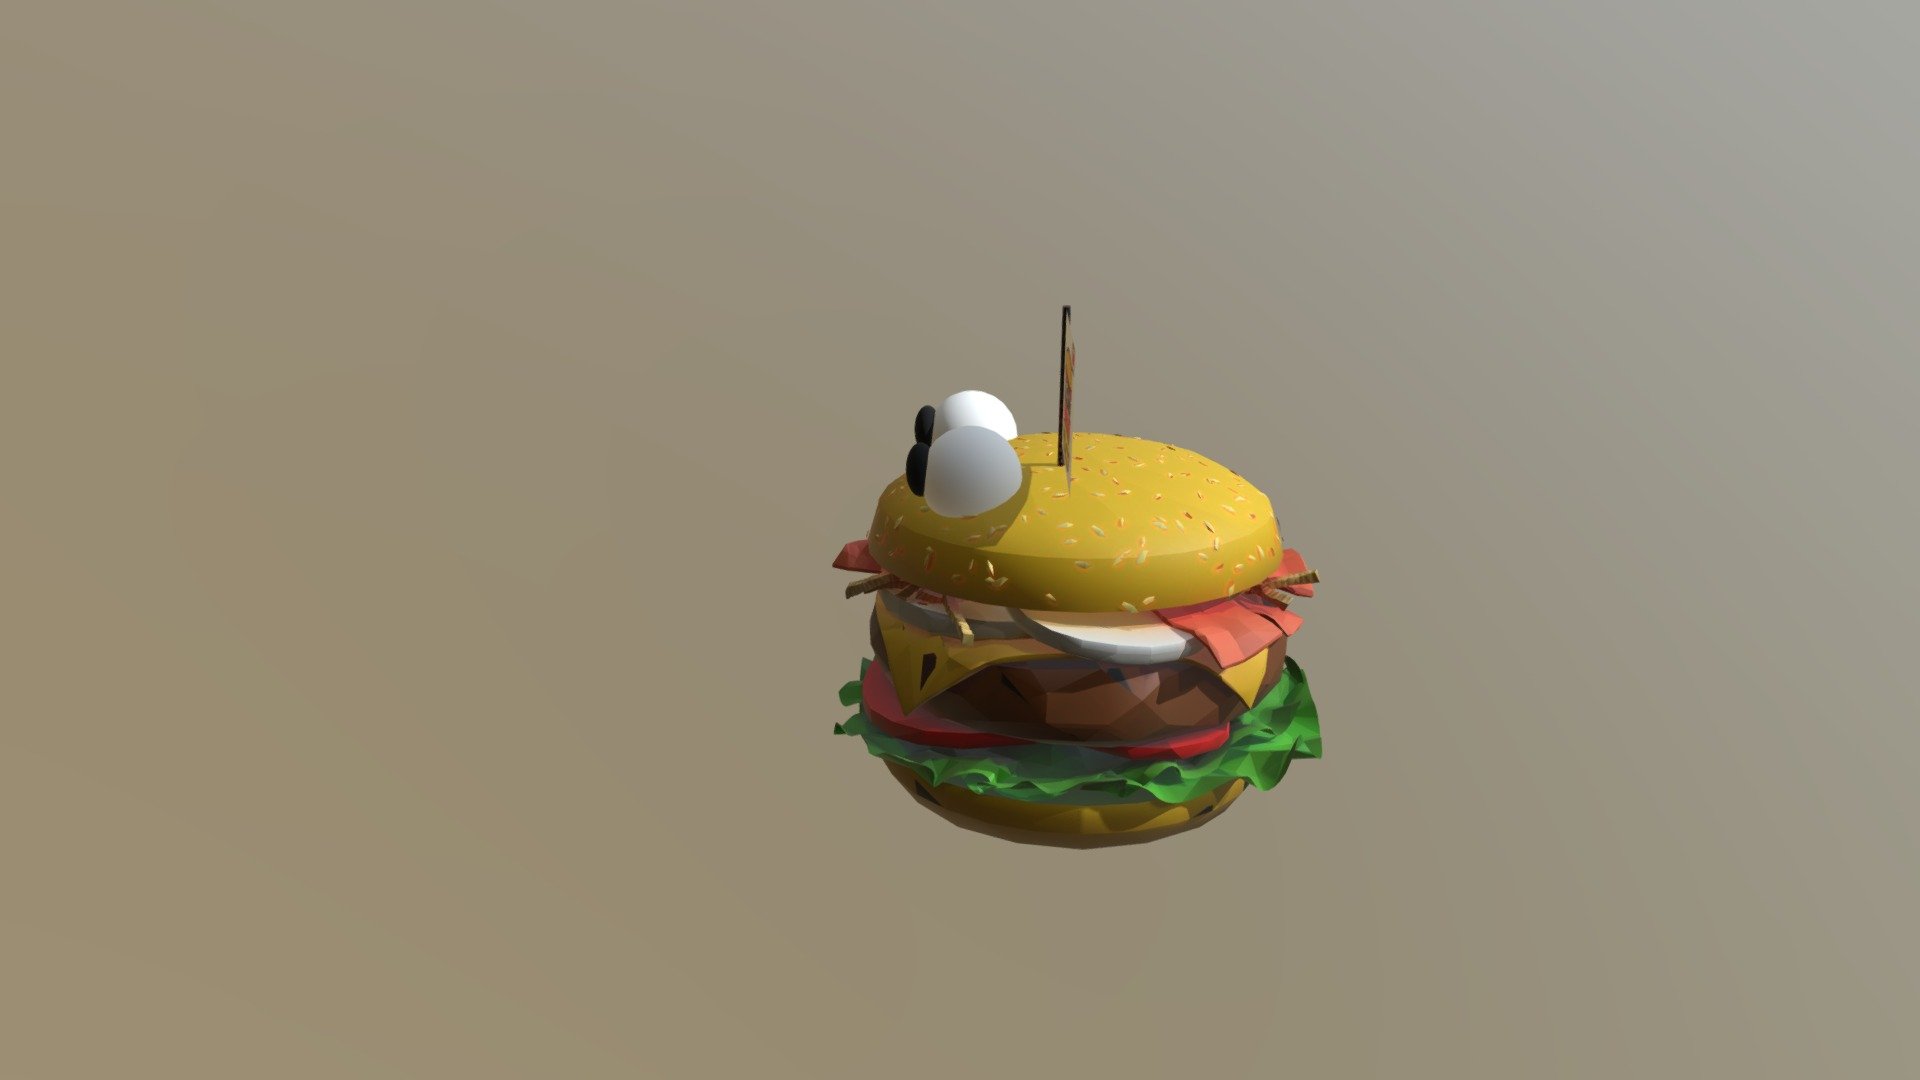 Burger Animation - 3D model by Aumentados (@minego90) 3d model